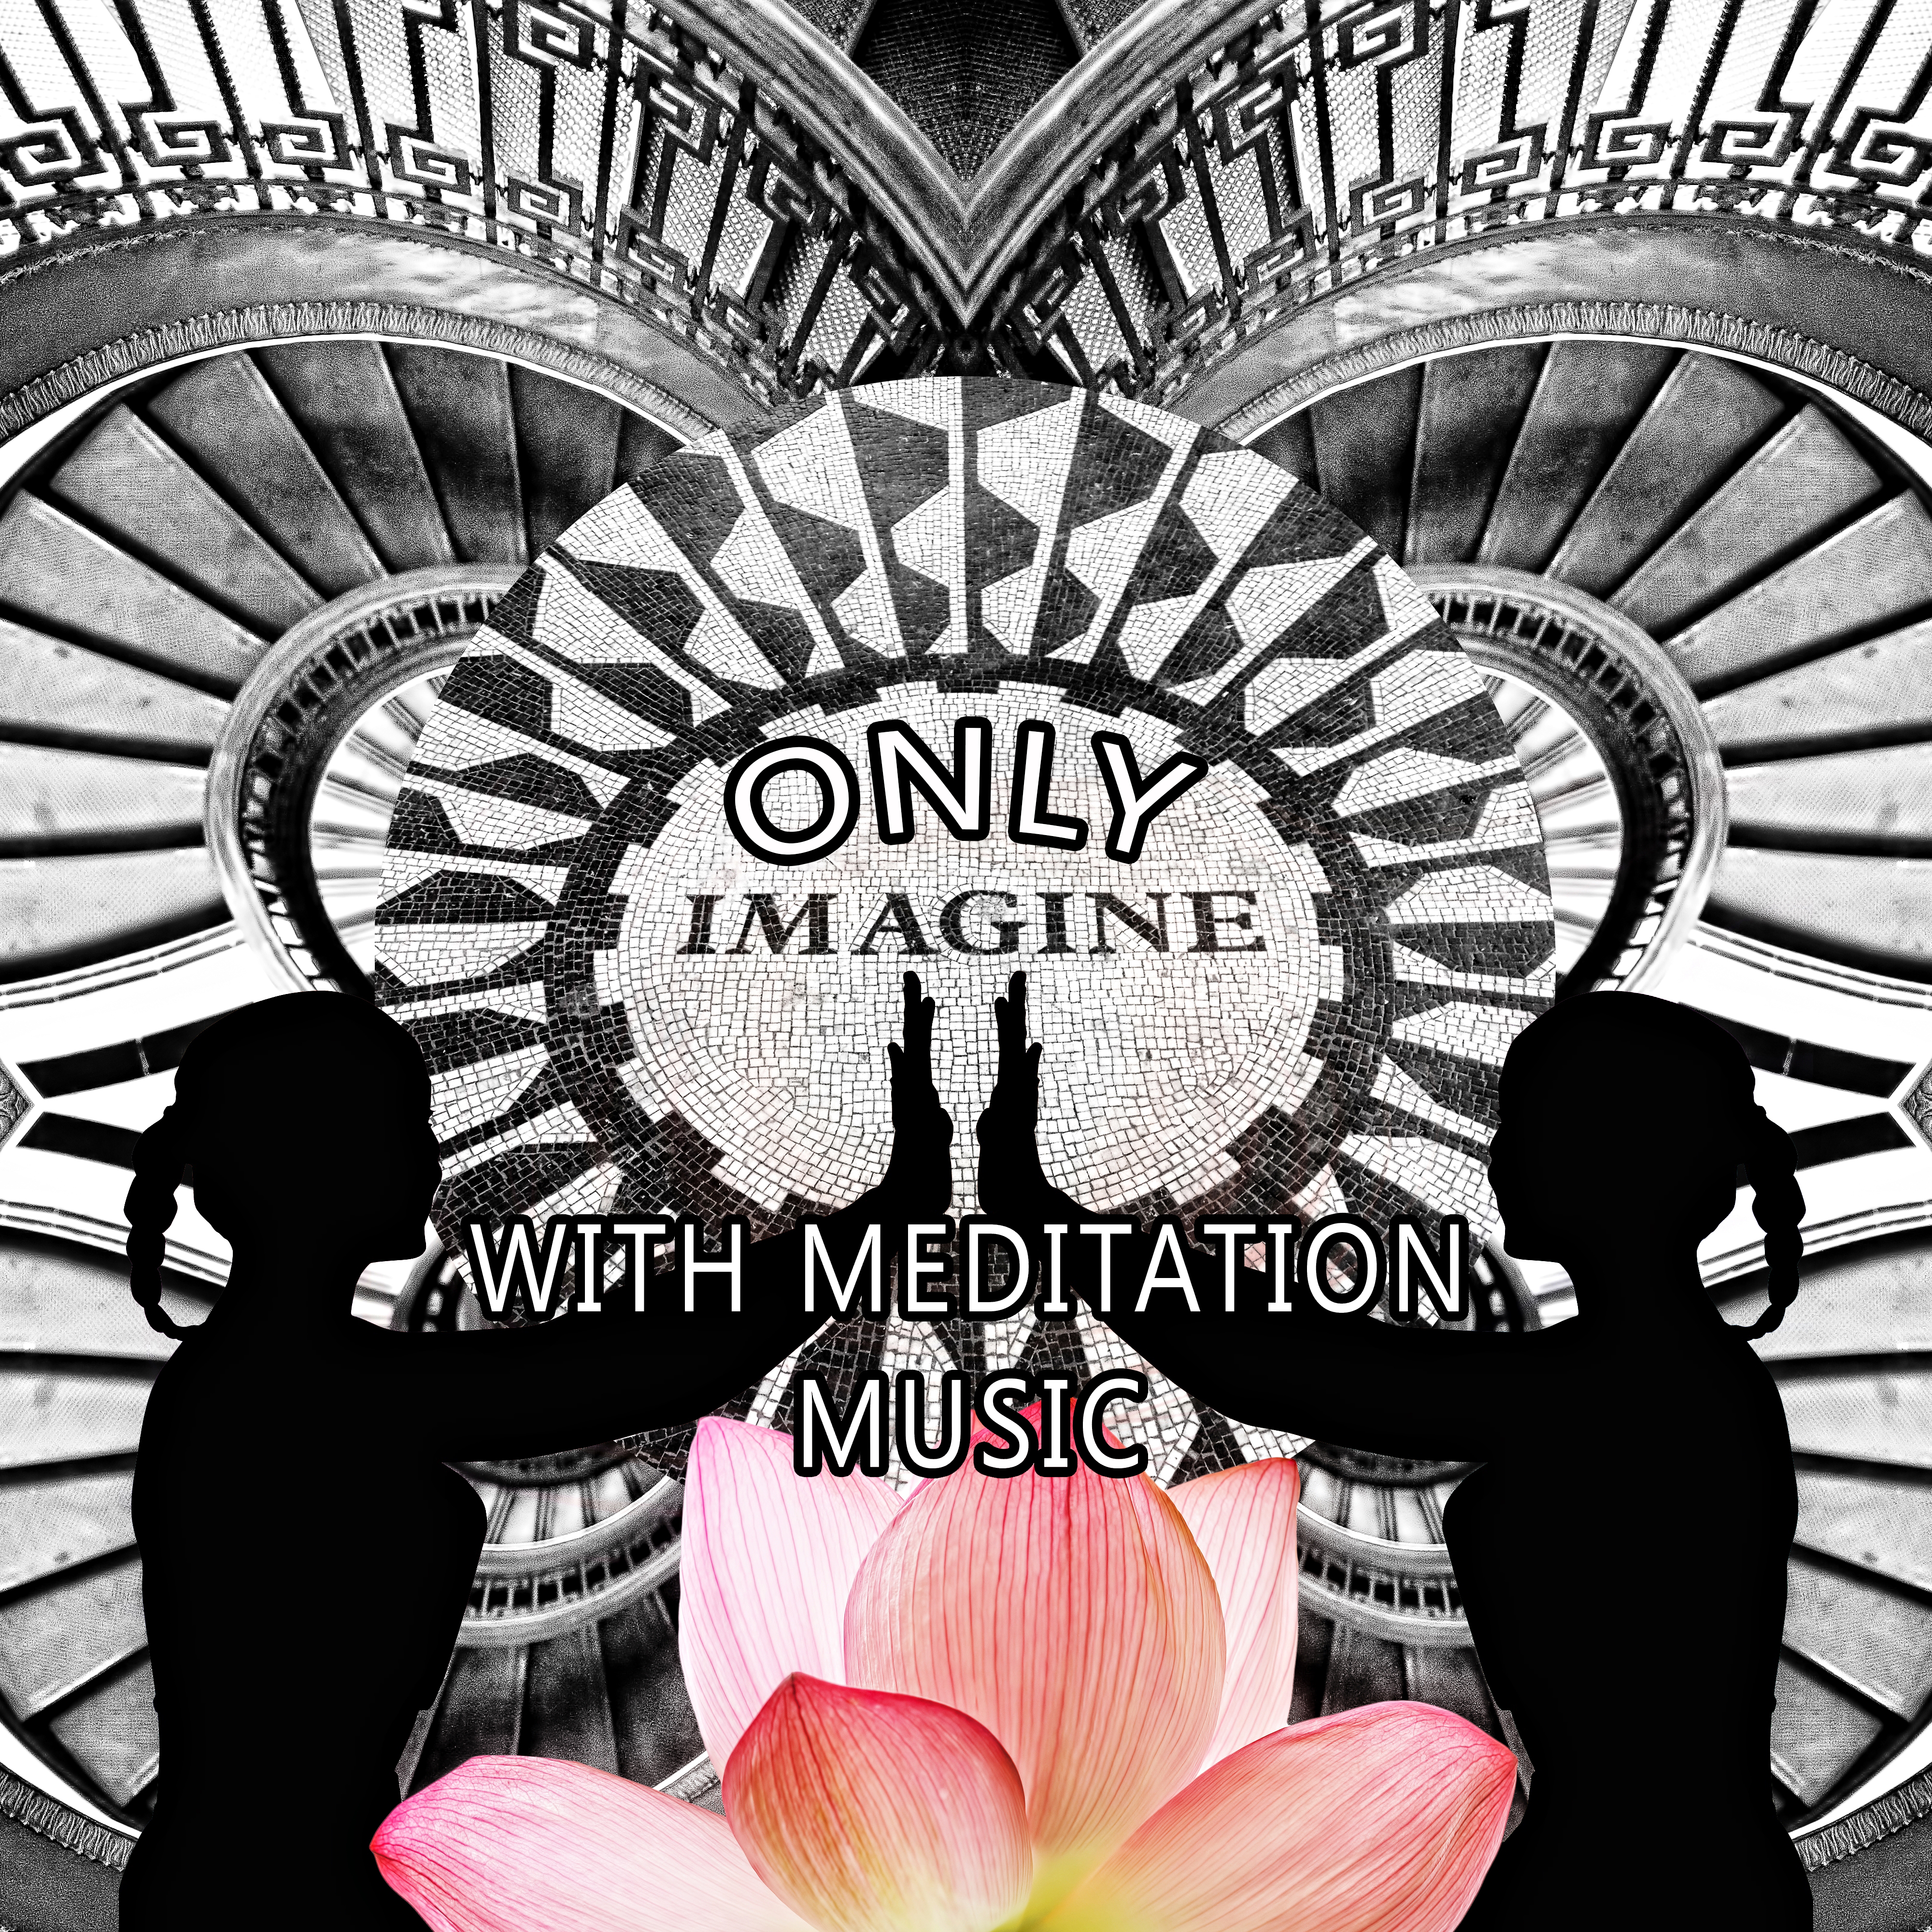 Only Imagine with Meditation Music - Endlessly Soothing Music, Mindfulness Meditation Spiritual Healing, Peaceful Music with the Sounds of Nature, Soothing Chill Out Music for Power Yoga